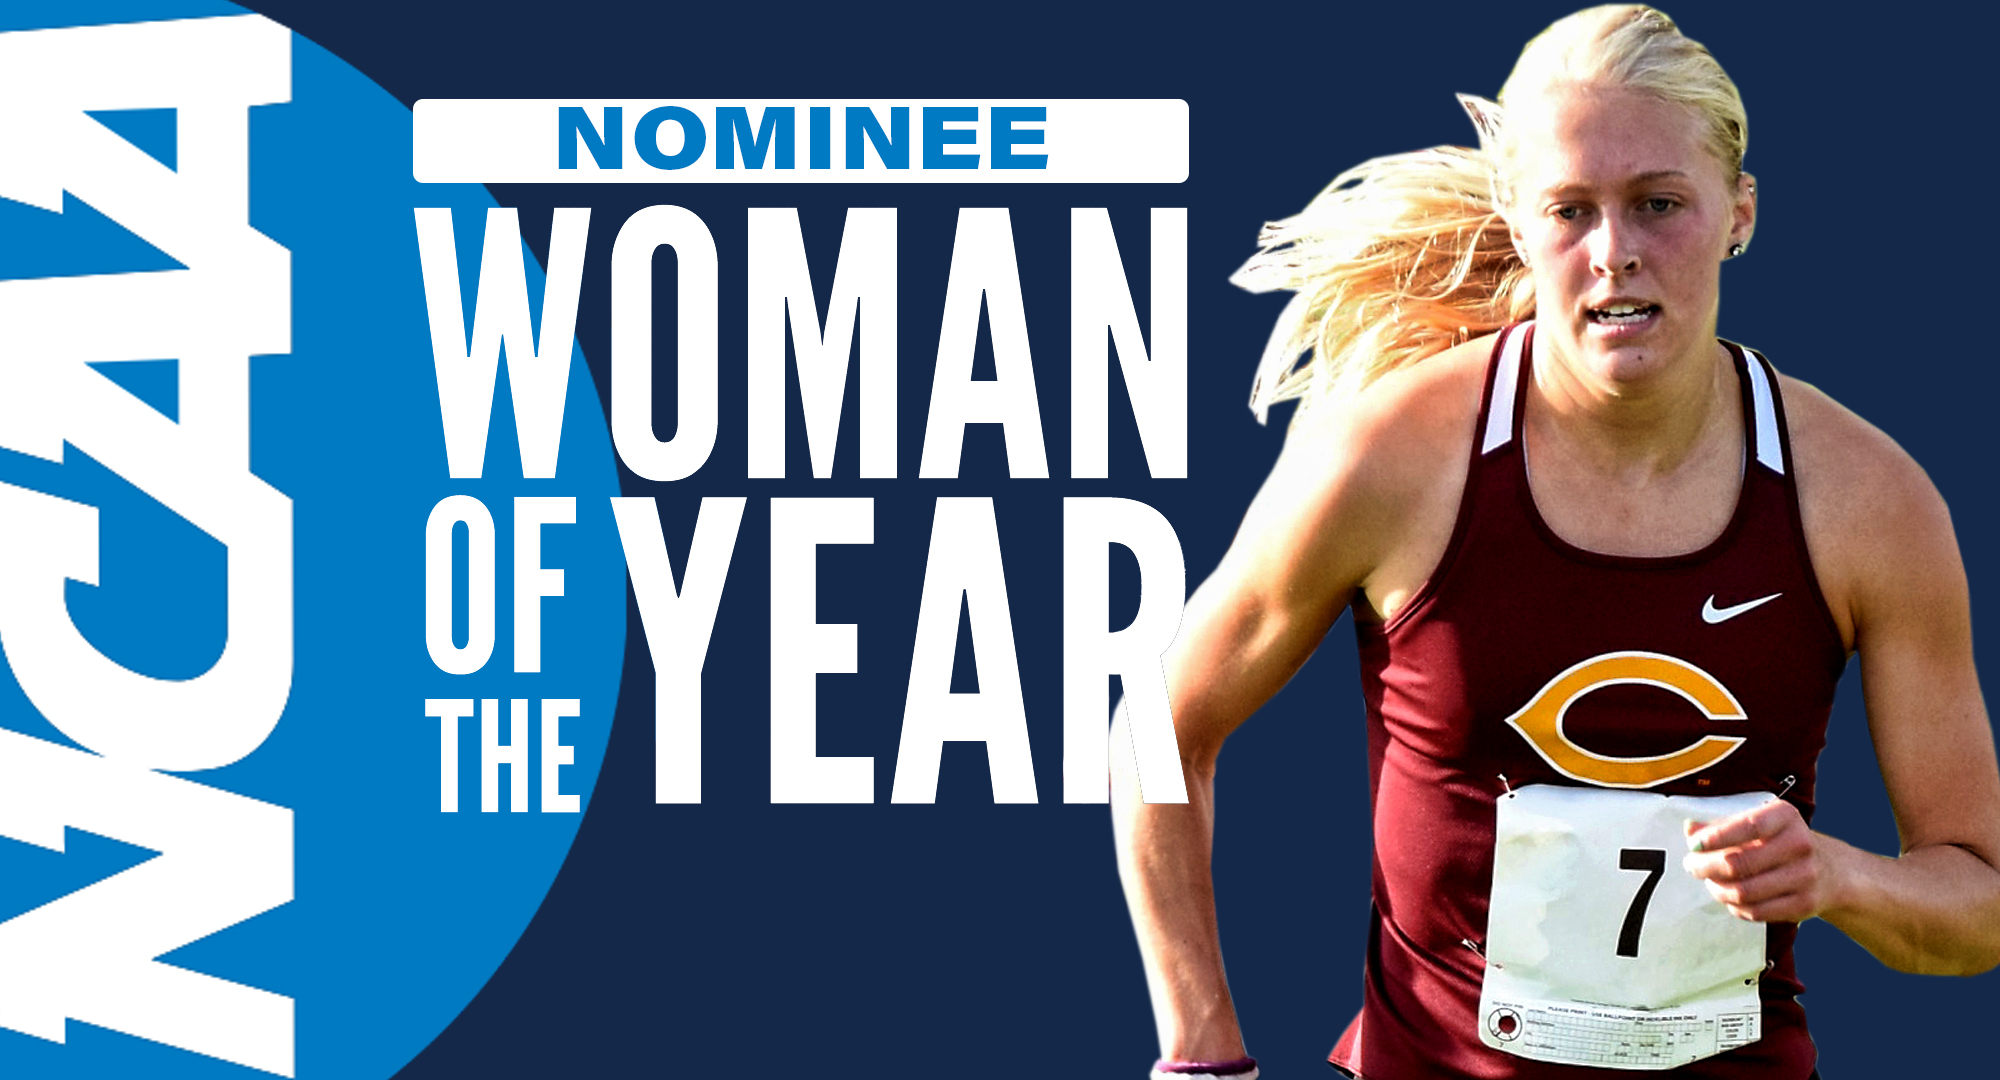 Miriah Forness is Concordia's nominee for the prestigious NCAA Woman of the Year award.